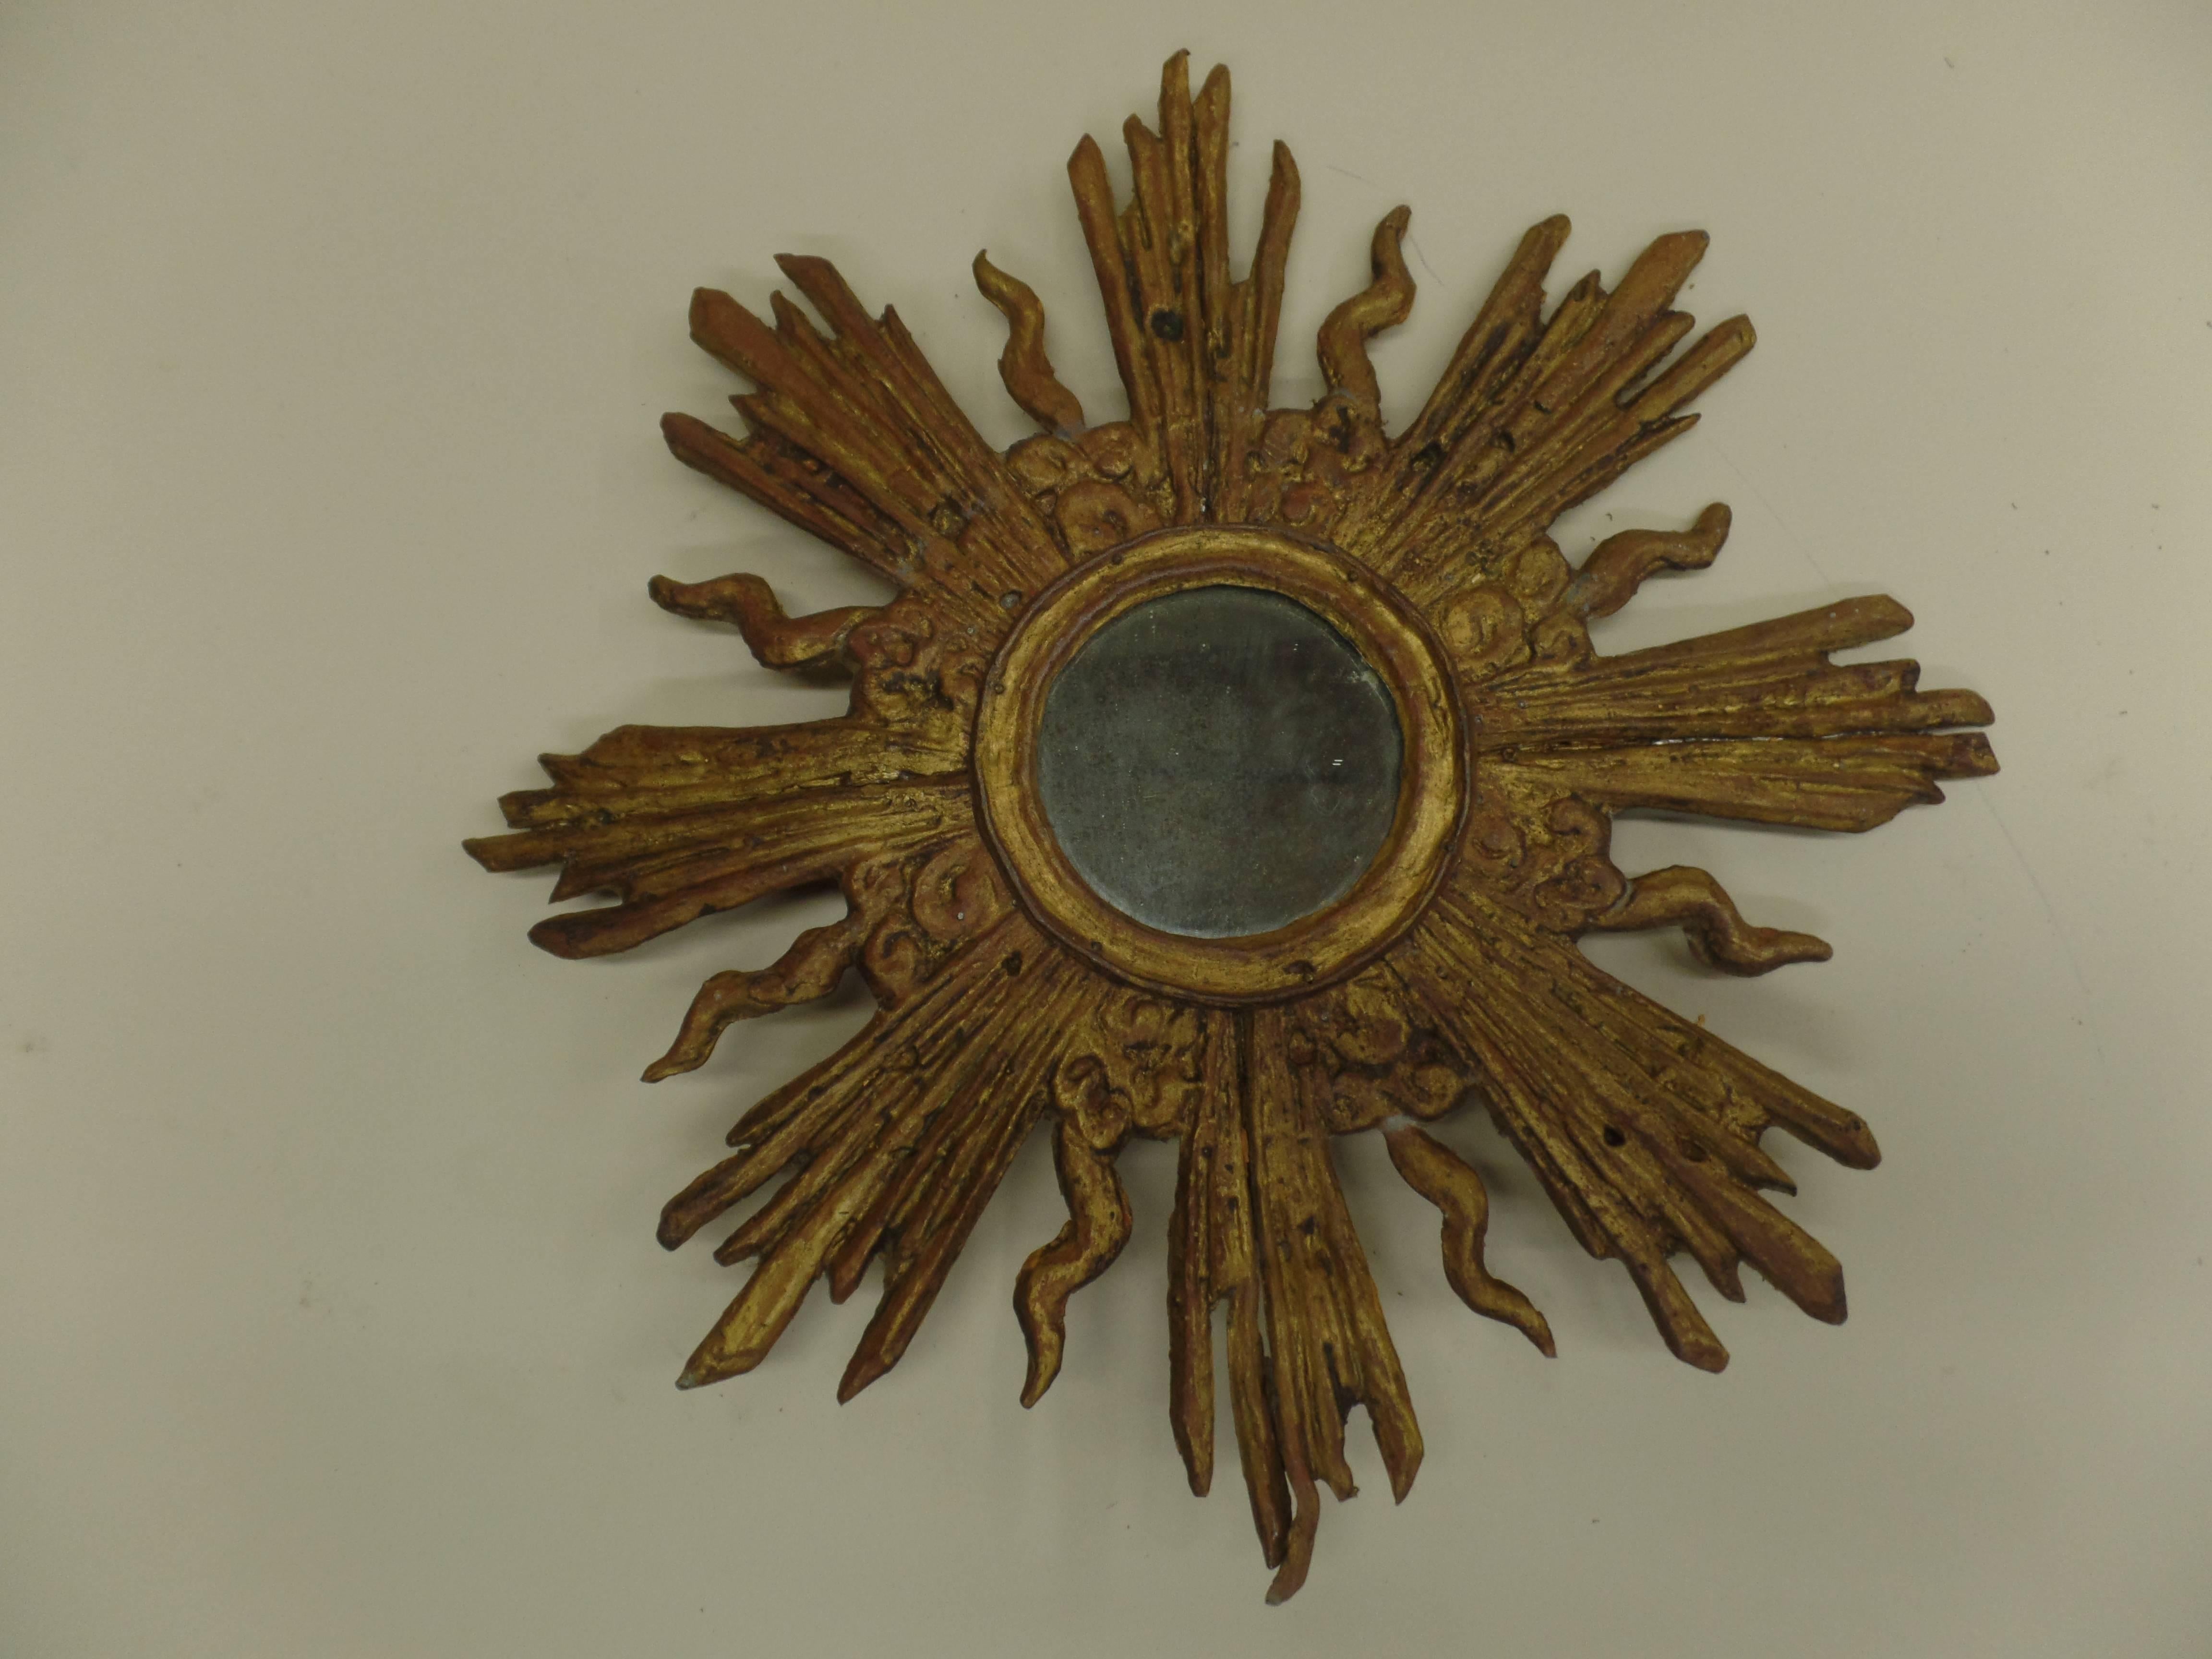 Rare French Modern Neoclassical, Louis XIV Style sunburst wall mirror composed of gilt lead attributed to Maison Jansen. 

